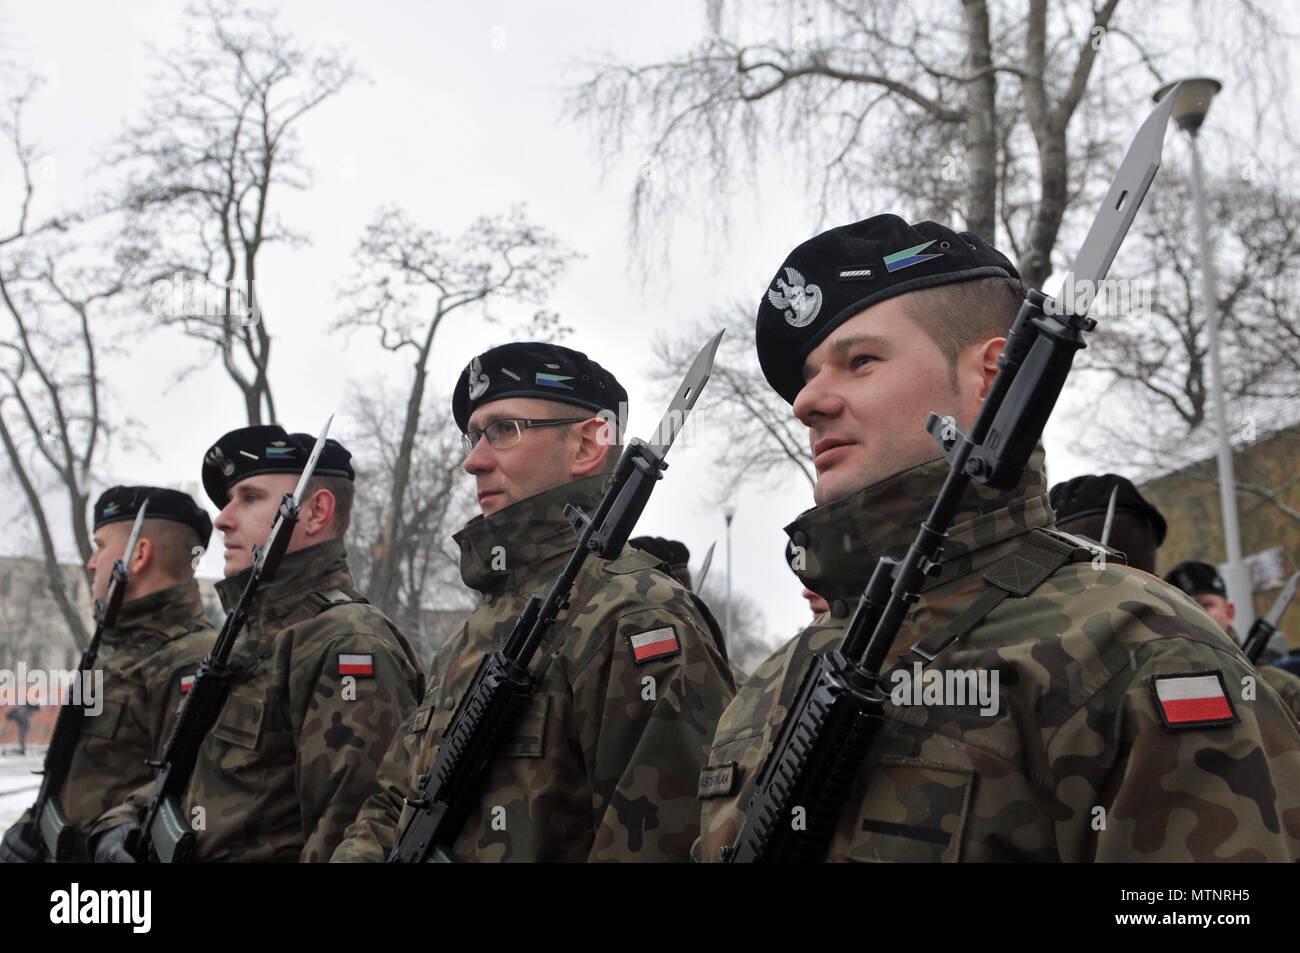 ZAGAN, Poland— Polish Soldiers stand at position of attention during a ceremony in celebration of Safe Poland day in Zagan, Poland, Jan. 14, at Gen. Stanislaw Macek Park. The celebration was an opportunity for the Polish citizens to welcome the Soldiers of 3rd Armored Brigade Combat Team, 4th Infantry Division. The 3-4 ABCT’s arrival marks the start of back-to-back rotations of armored brigades in Europe as part of Atlantic Resolve. This rotation will enhance deterrence capabilities in the region, improve the U.S. ability to respond to potential crises and defend allies and partners in the Eur Stock Photo